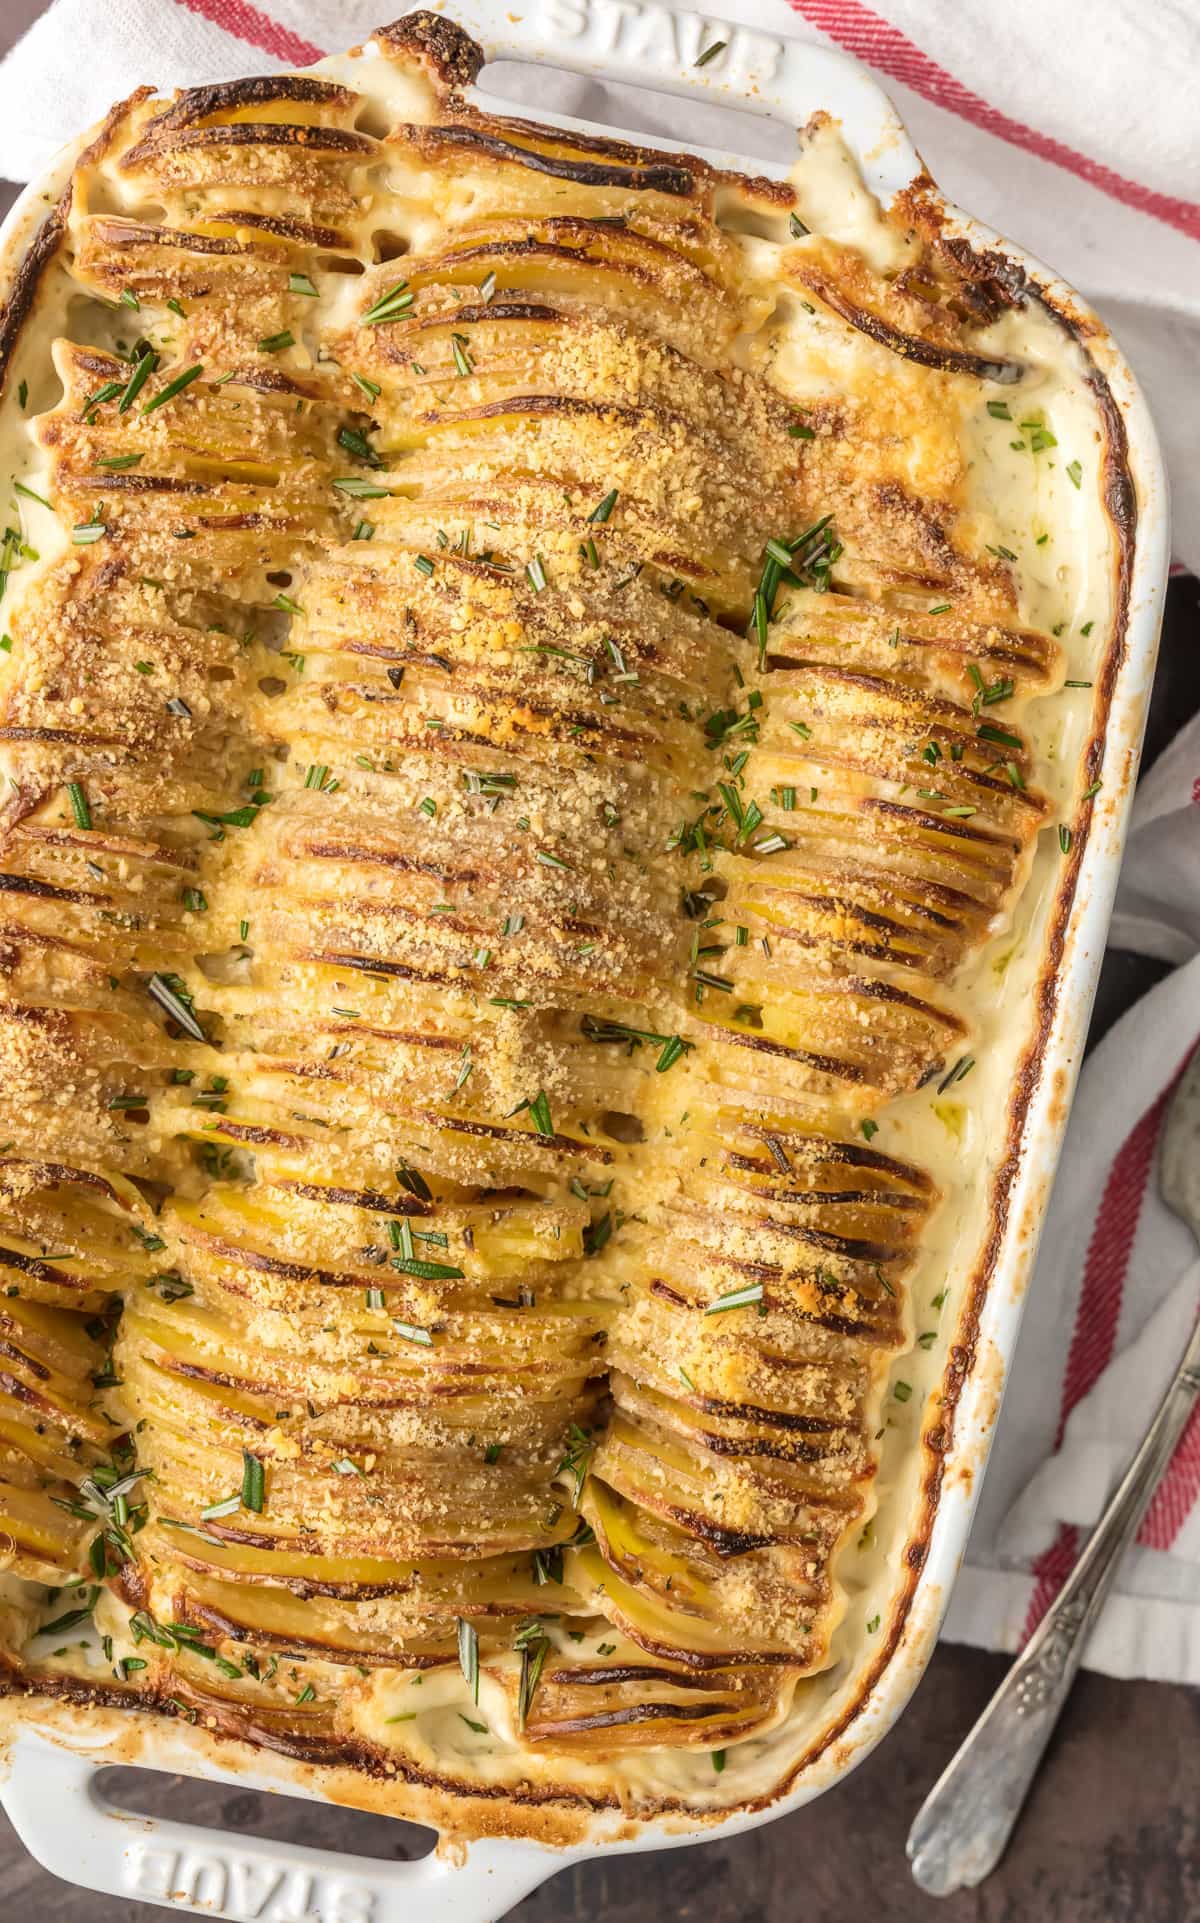 These CHEESY GARLIC HERB SCALLOPED POTATOES are one of our favorite holiday side dishes! Made creamy with a secret ingredient that you'll never skip again! Beautiful and delicious potatoes gratin!